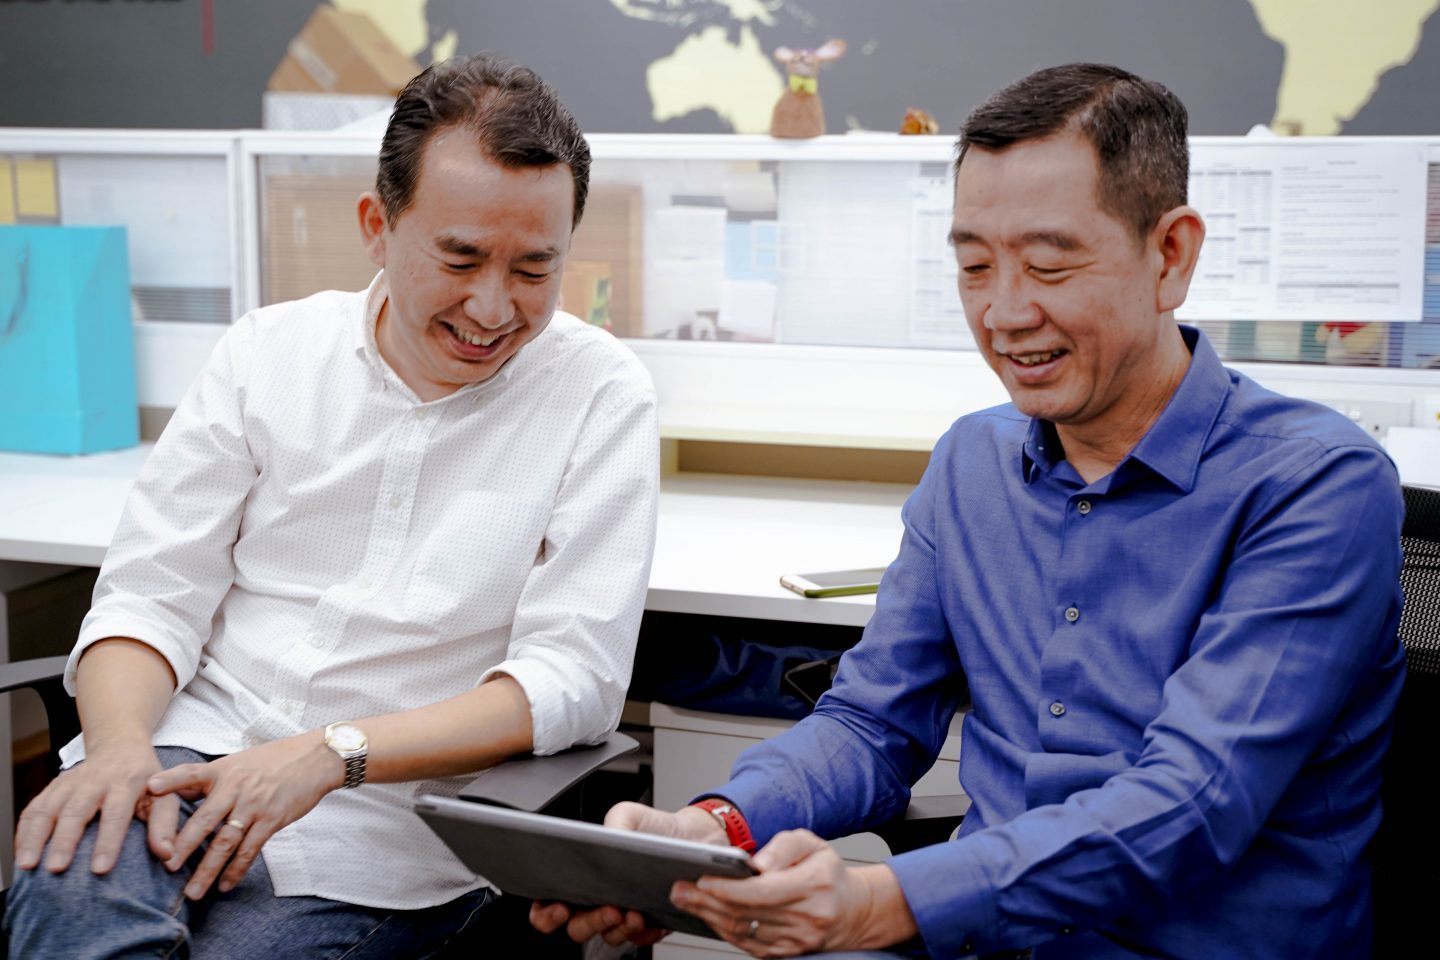 Hock Chye and Kok Hiang sharing a jovial moment in office.